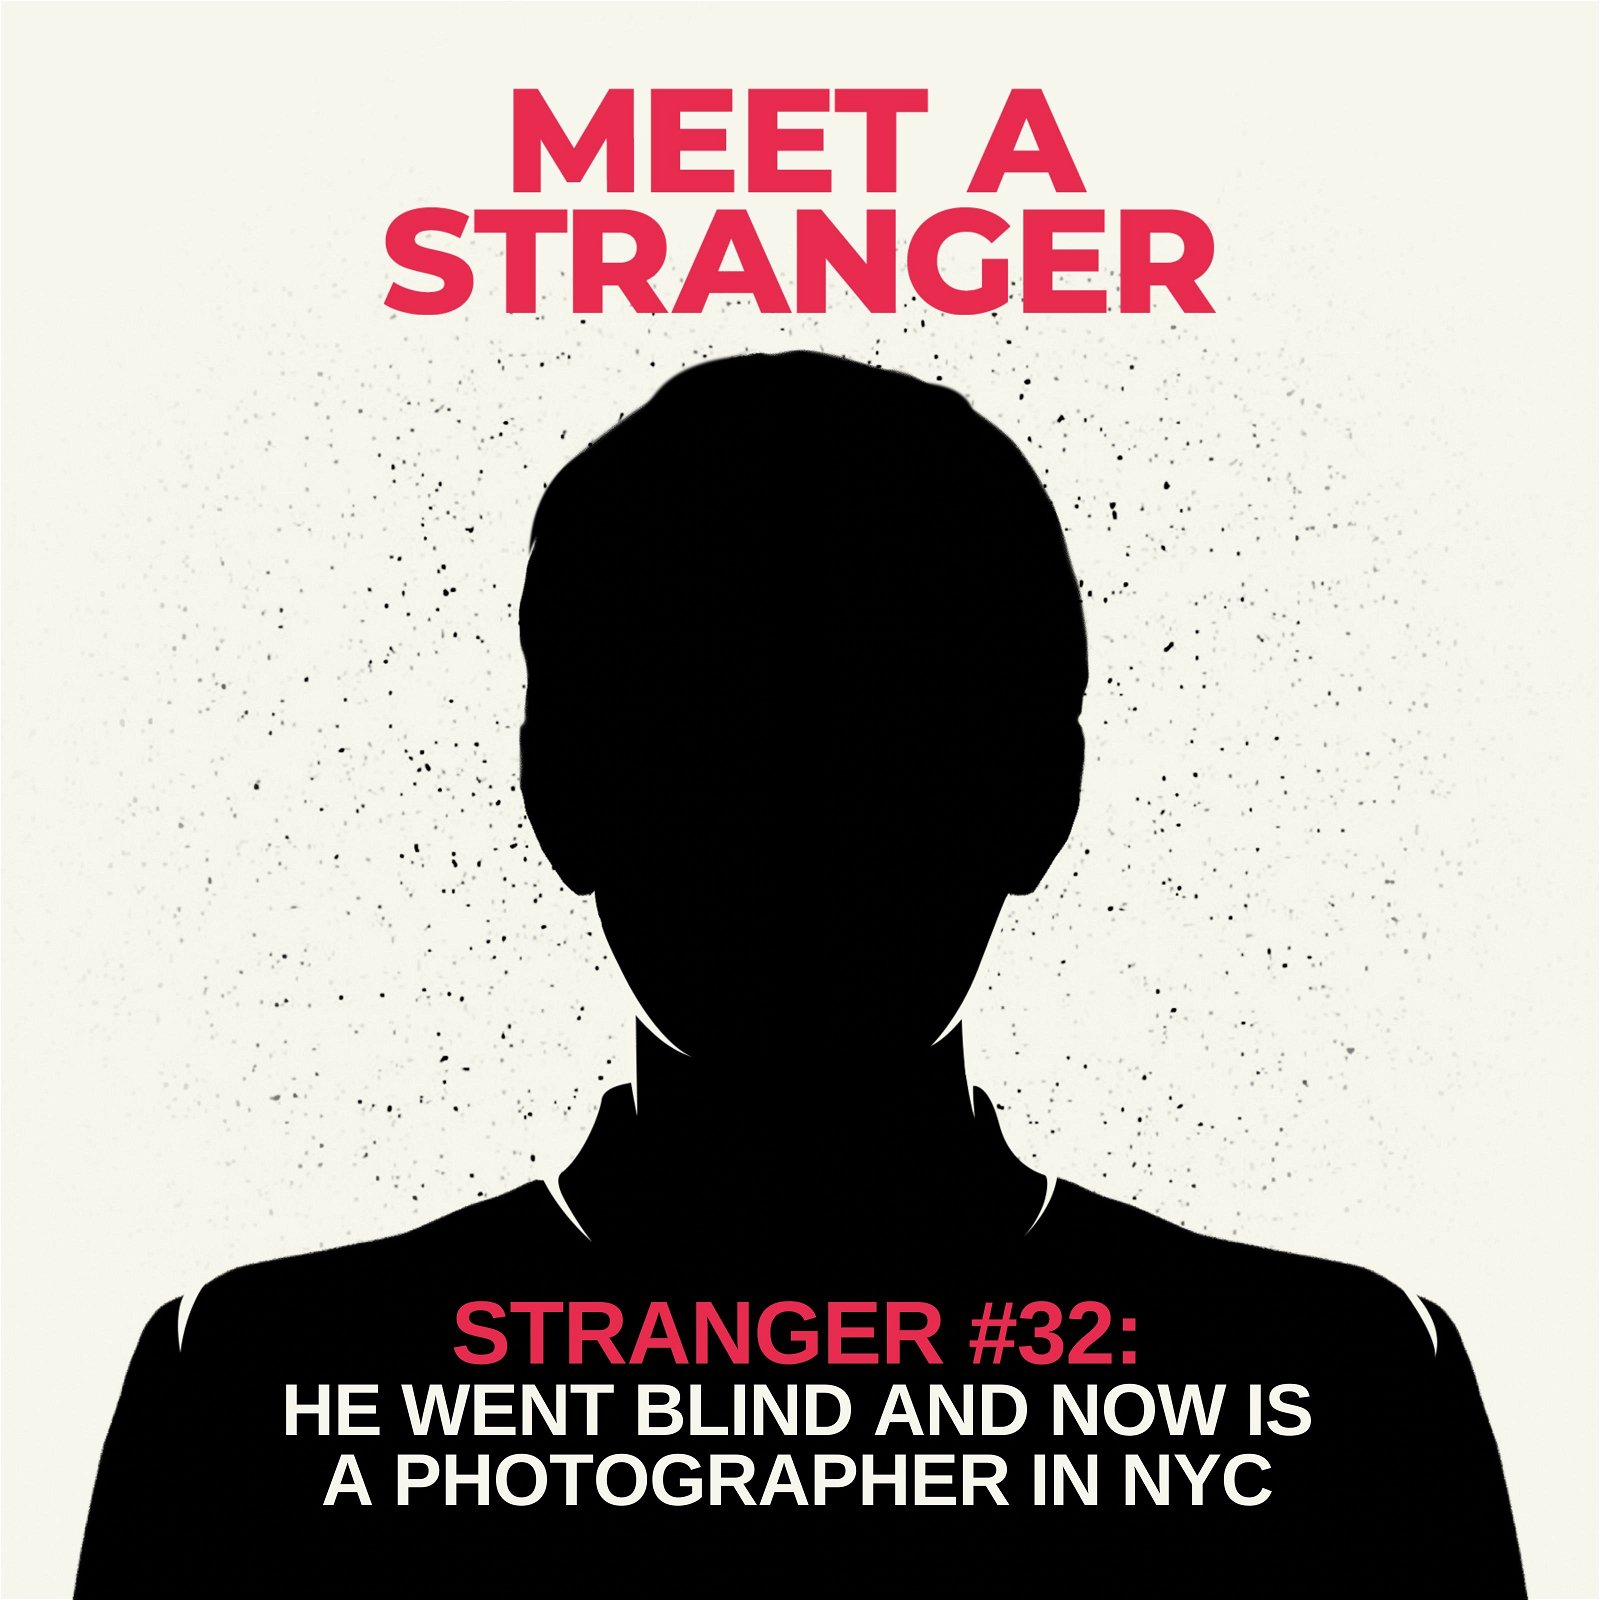 Stranger #32: He Went Blind and Now is a Photographer in NYC